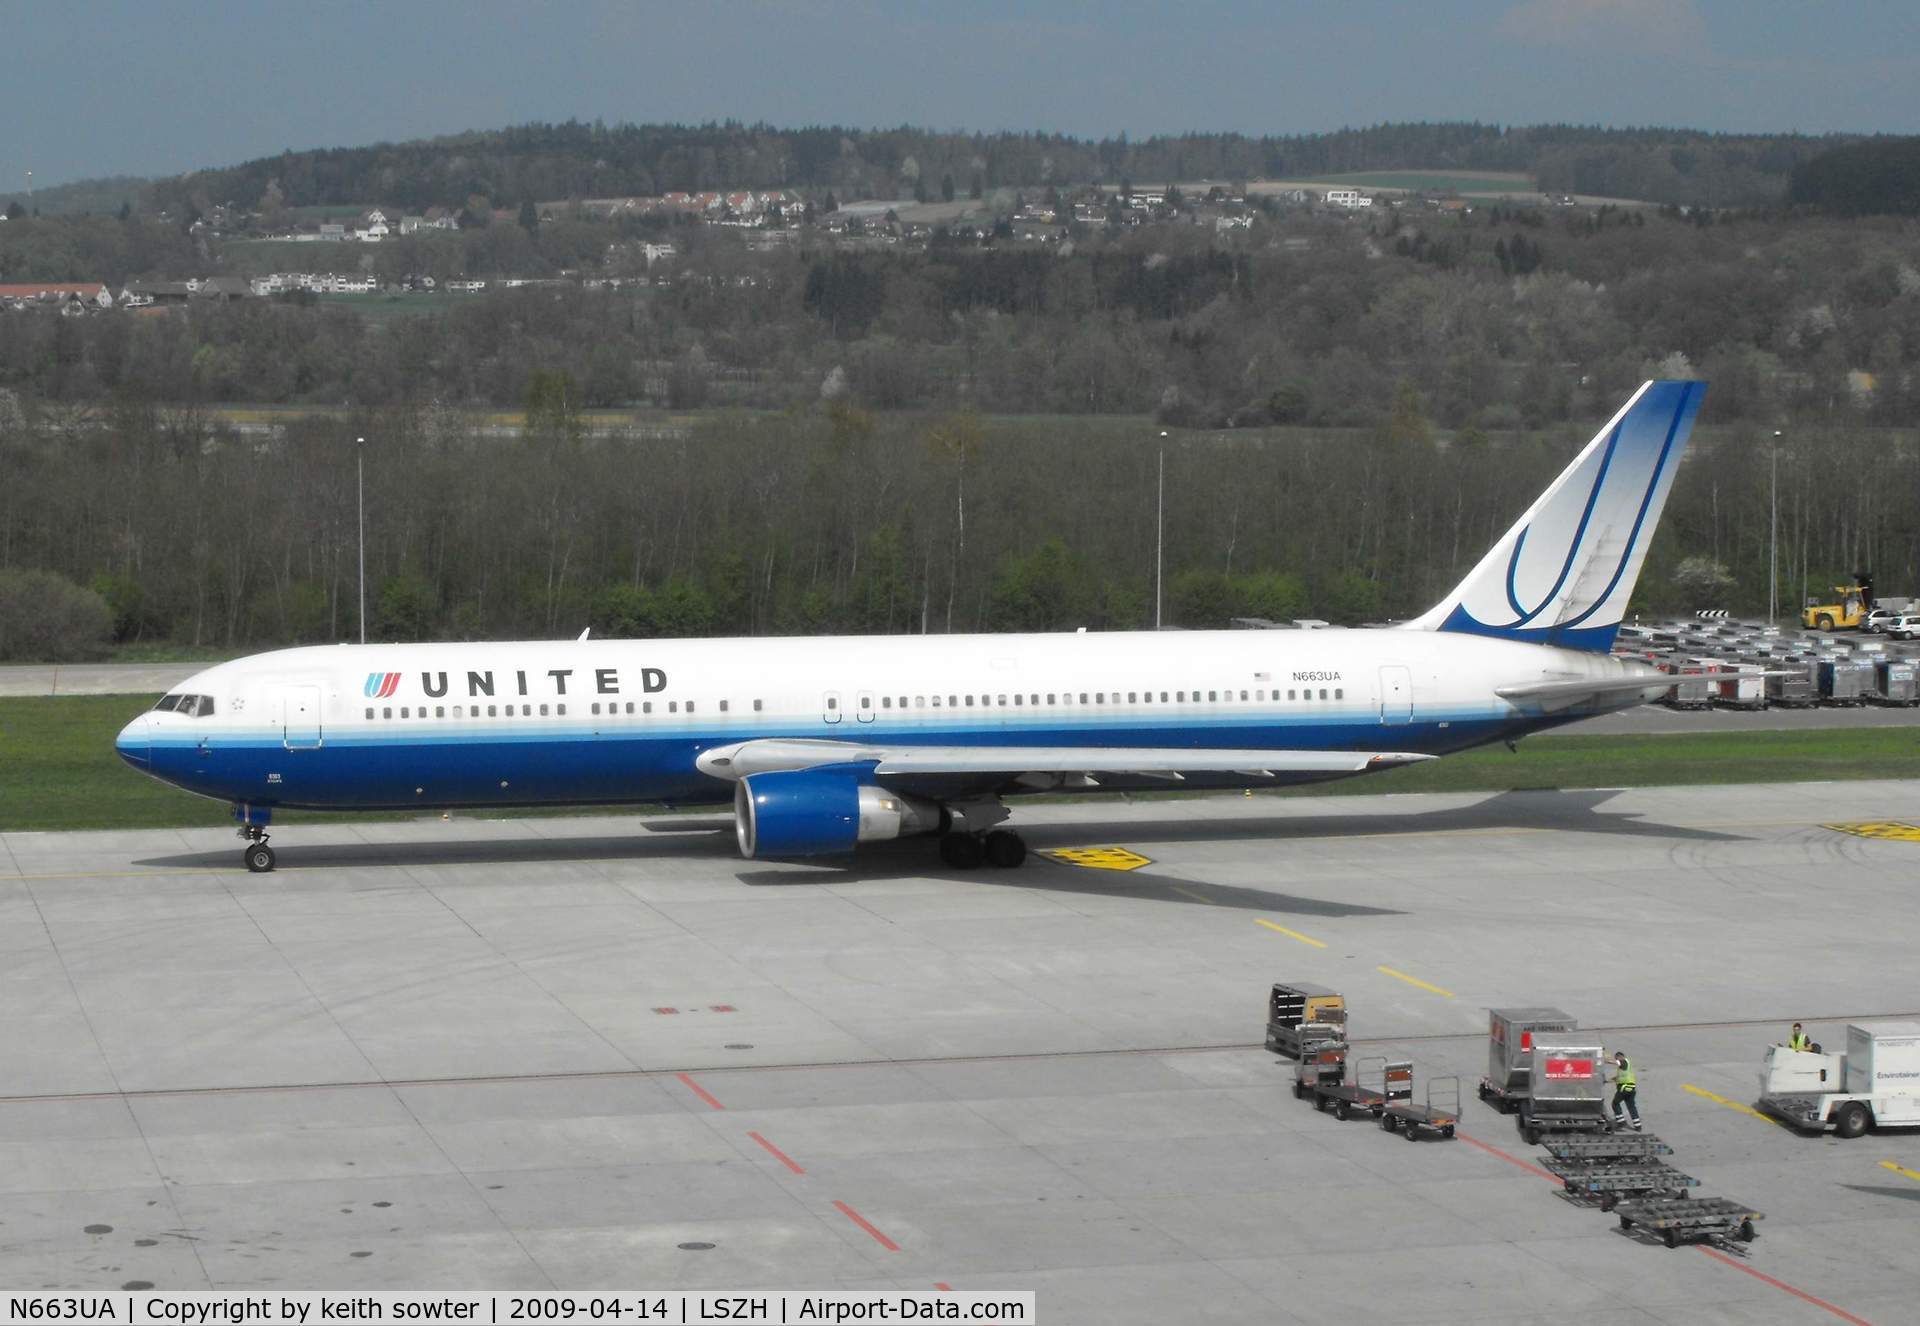 N663UA, 1993 Boeing 767-322 C/N 27160, Taken from the excellent Viewing Deck 